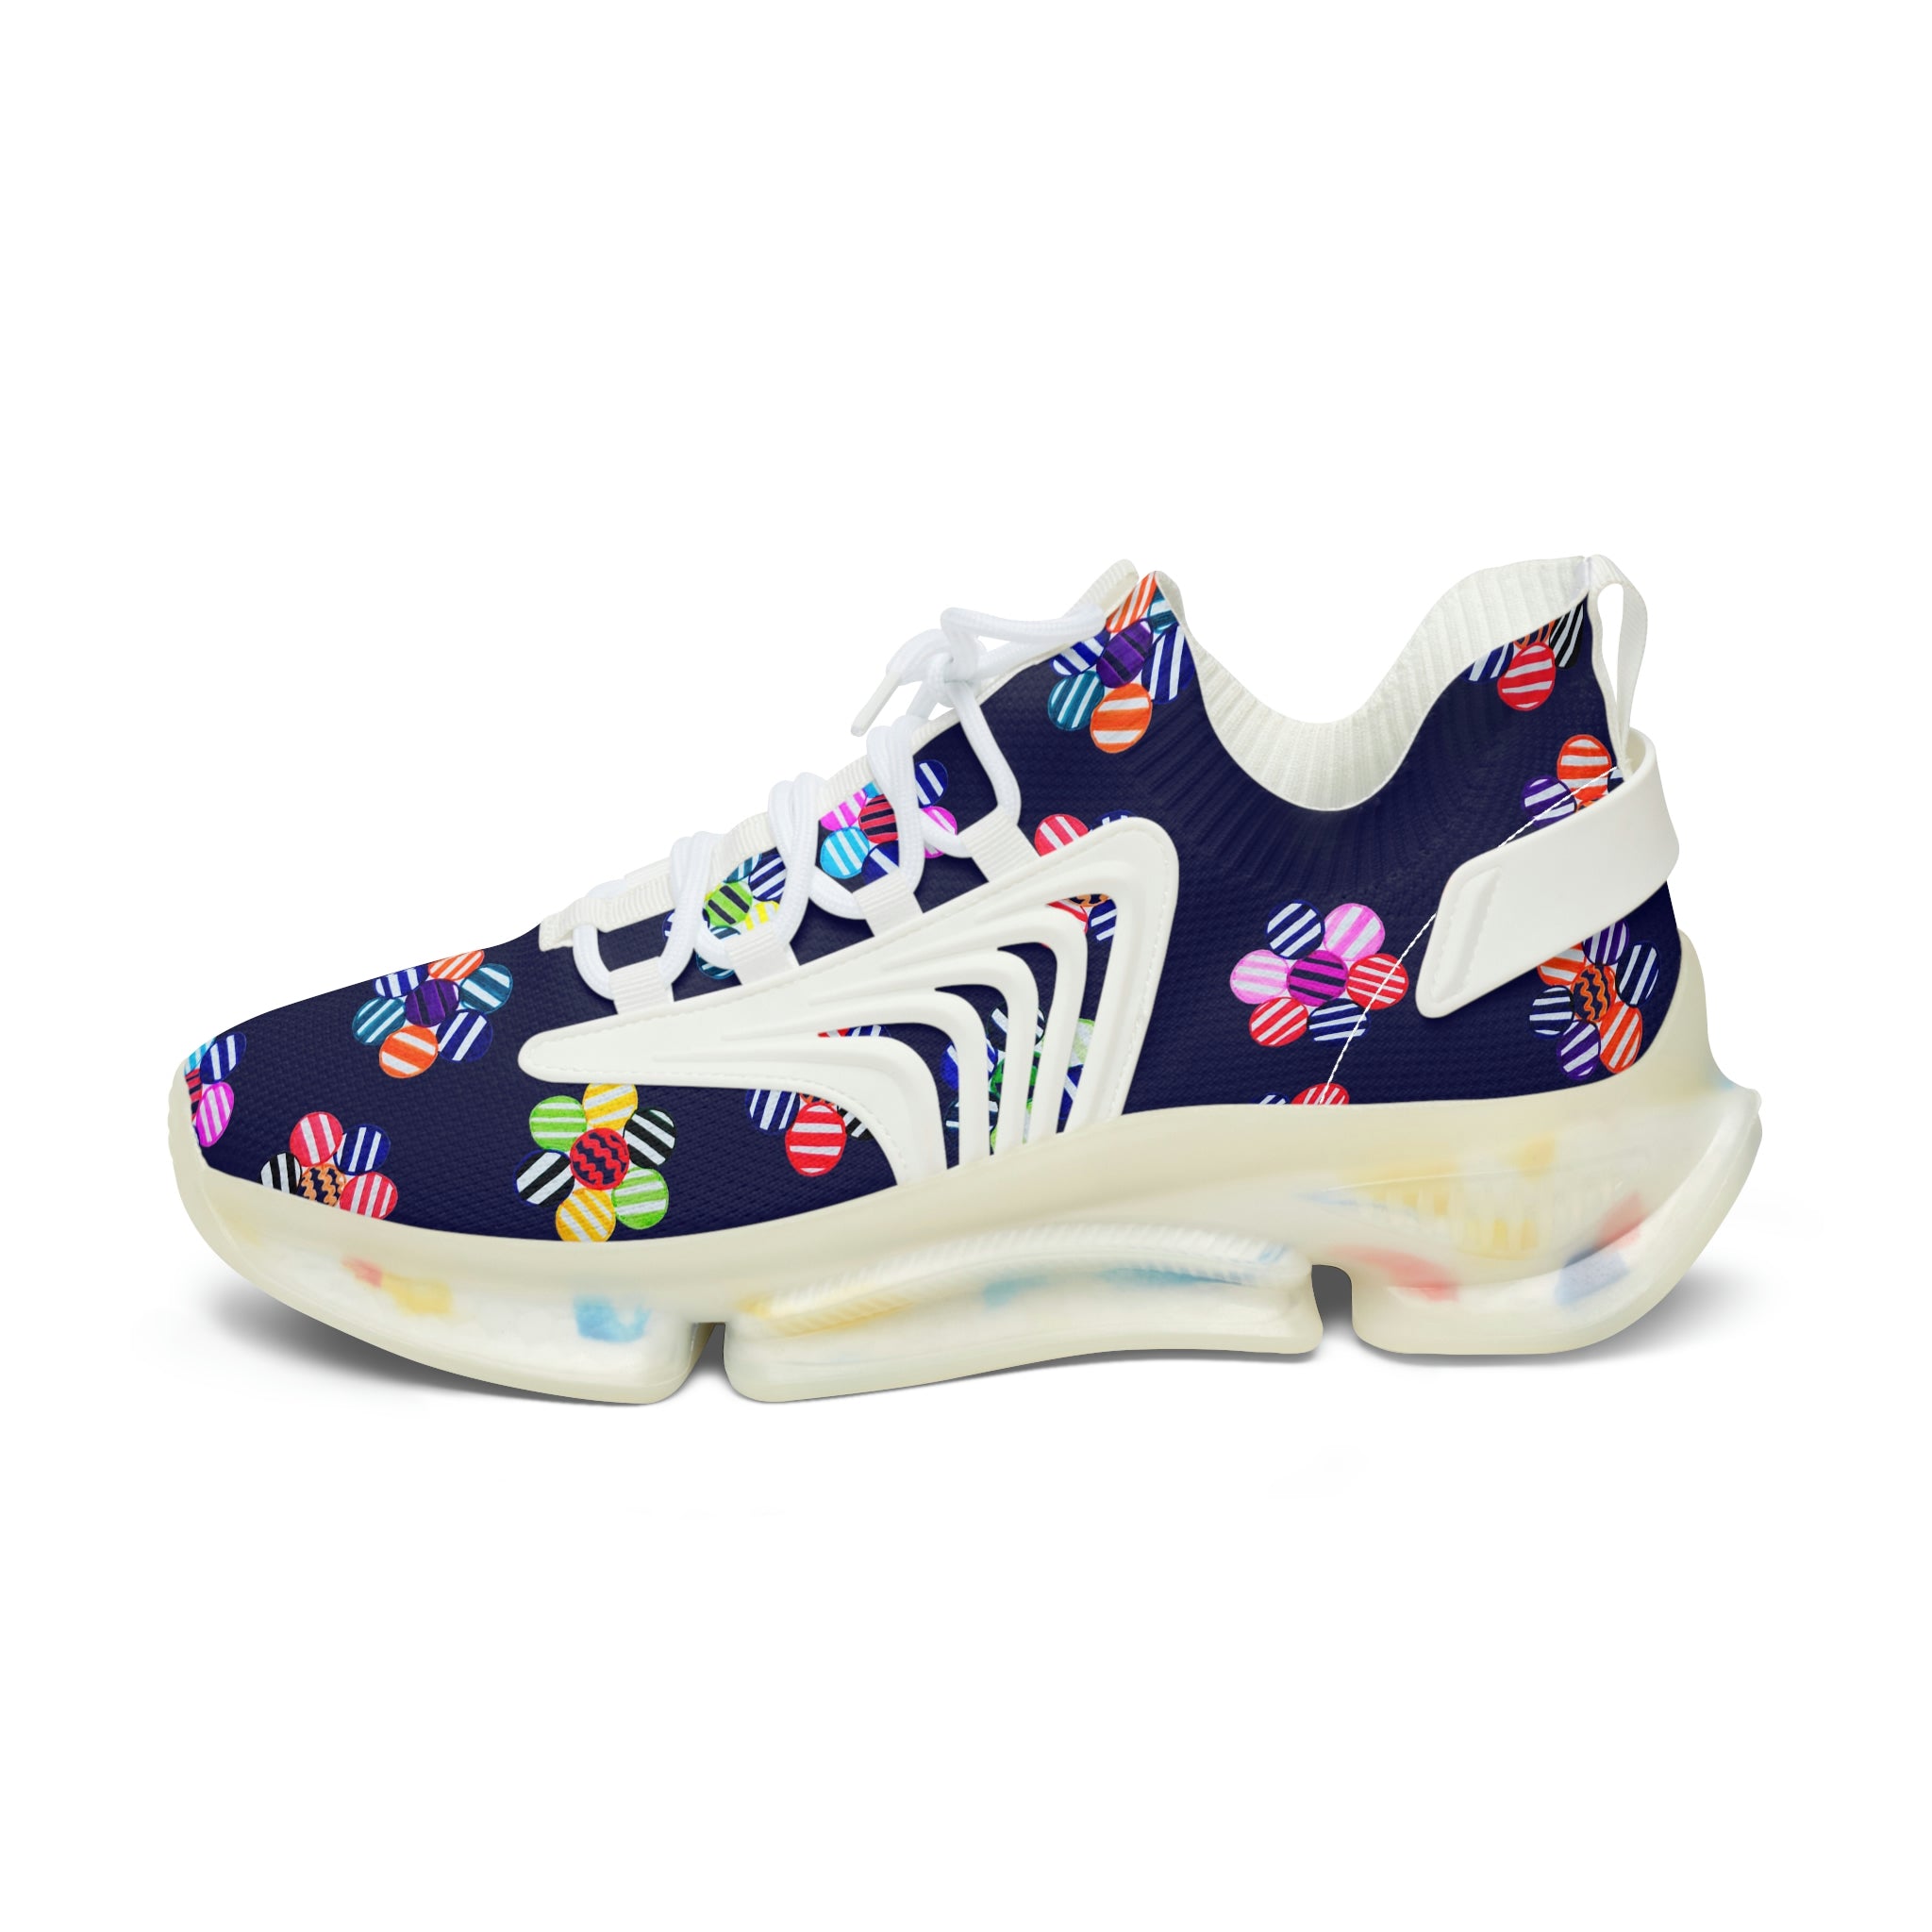 Ink Candy Floral Printed OTT Women's Mesh Knit Sneakers